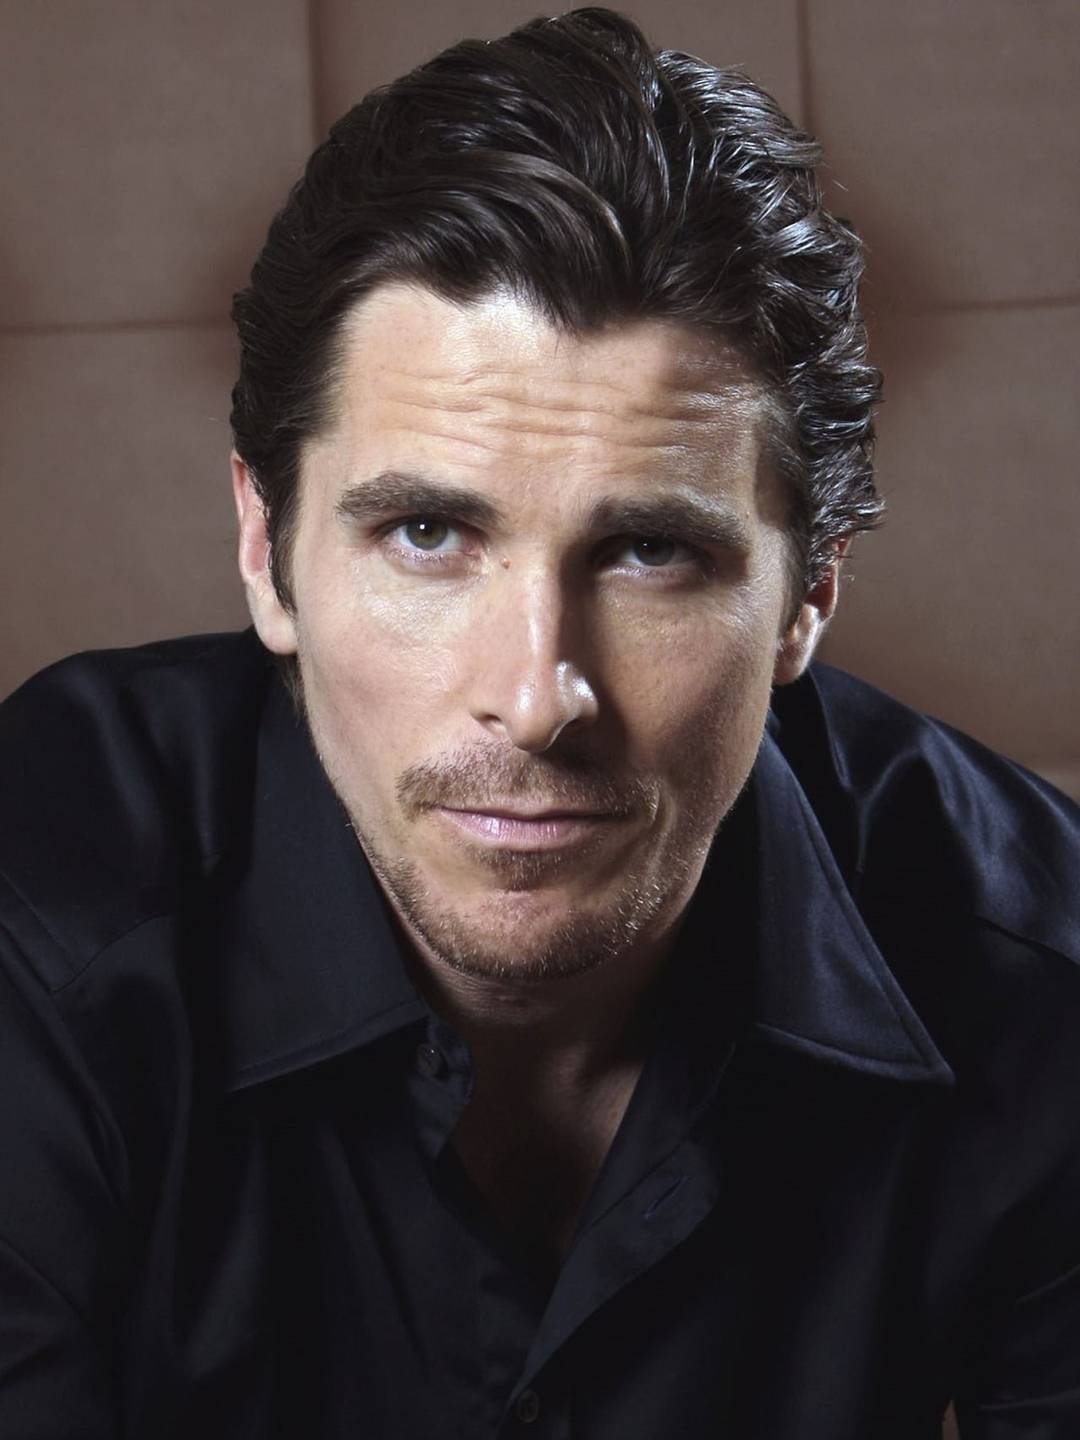 Christian Bale who is his father